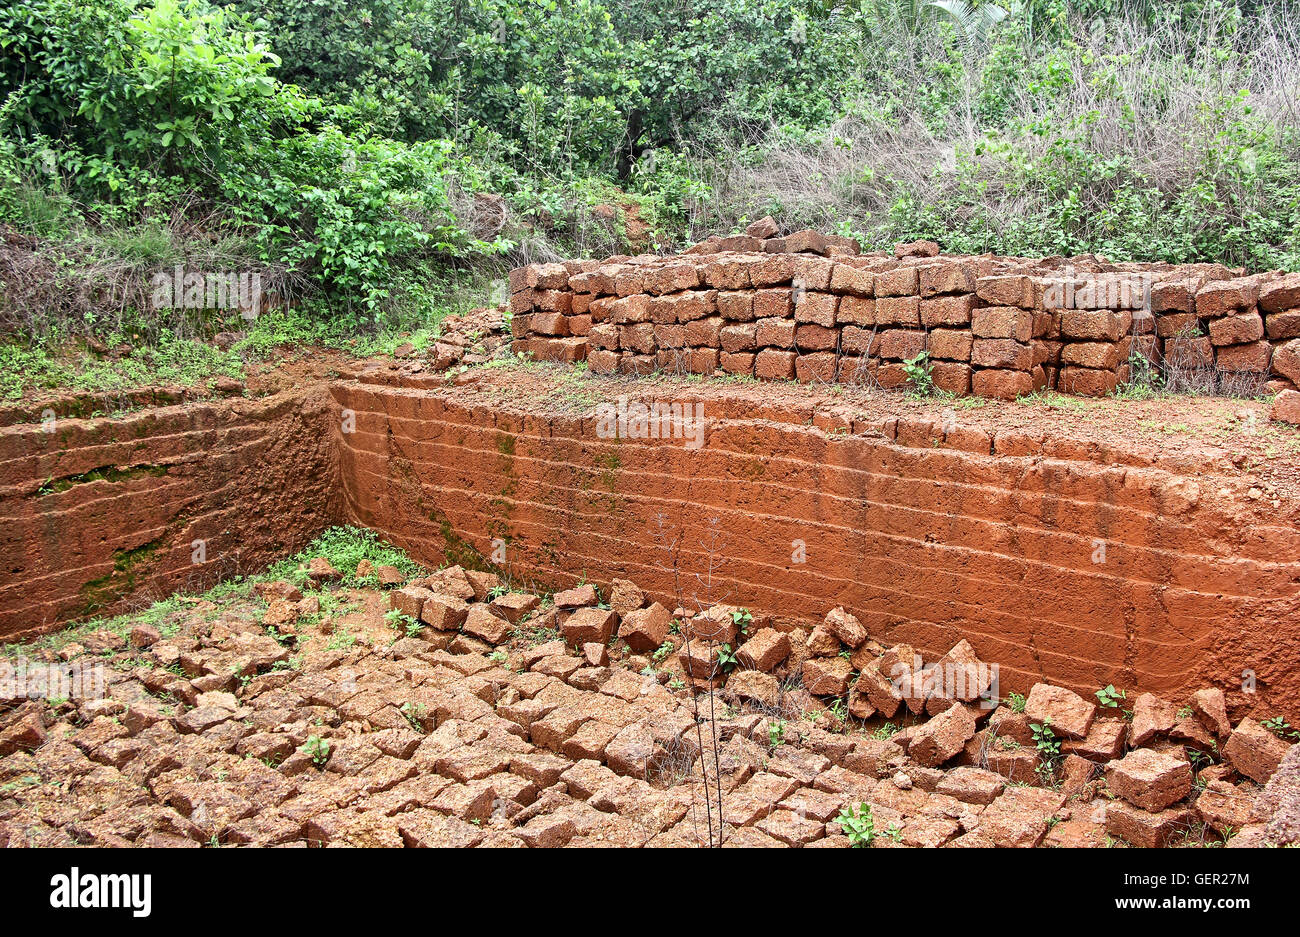 Quarry of laterite stone, a soft rock widely used as building material of old forts and houses in Goa and Konkan region, India. Stock Photo